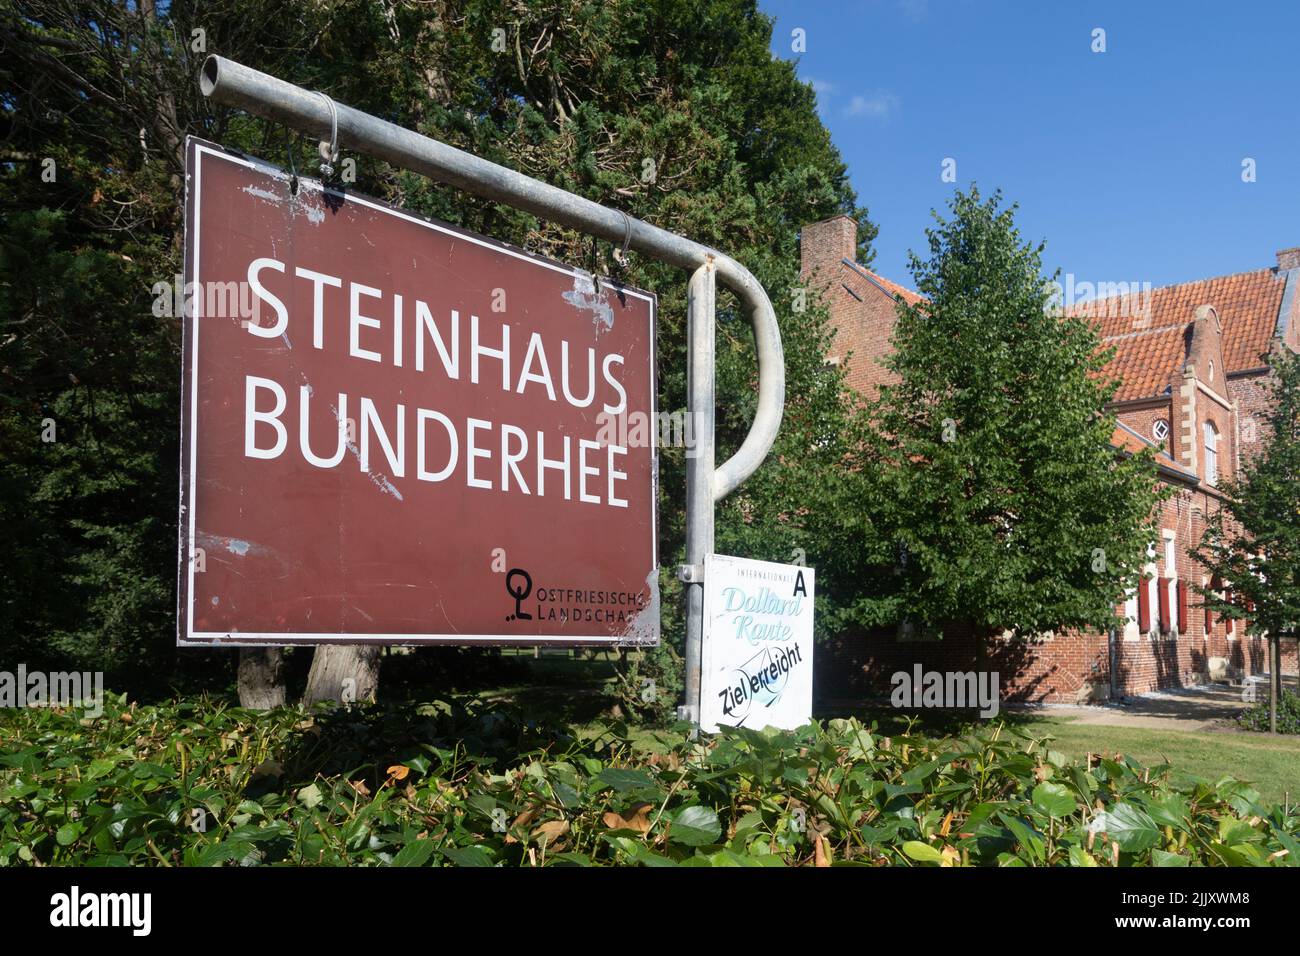 Sign at the chief's castle Steinhaus Bunderhee in Bunde, East Frisia, Lower Saxony, Germany. Stock Photo